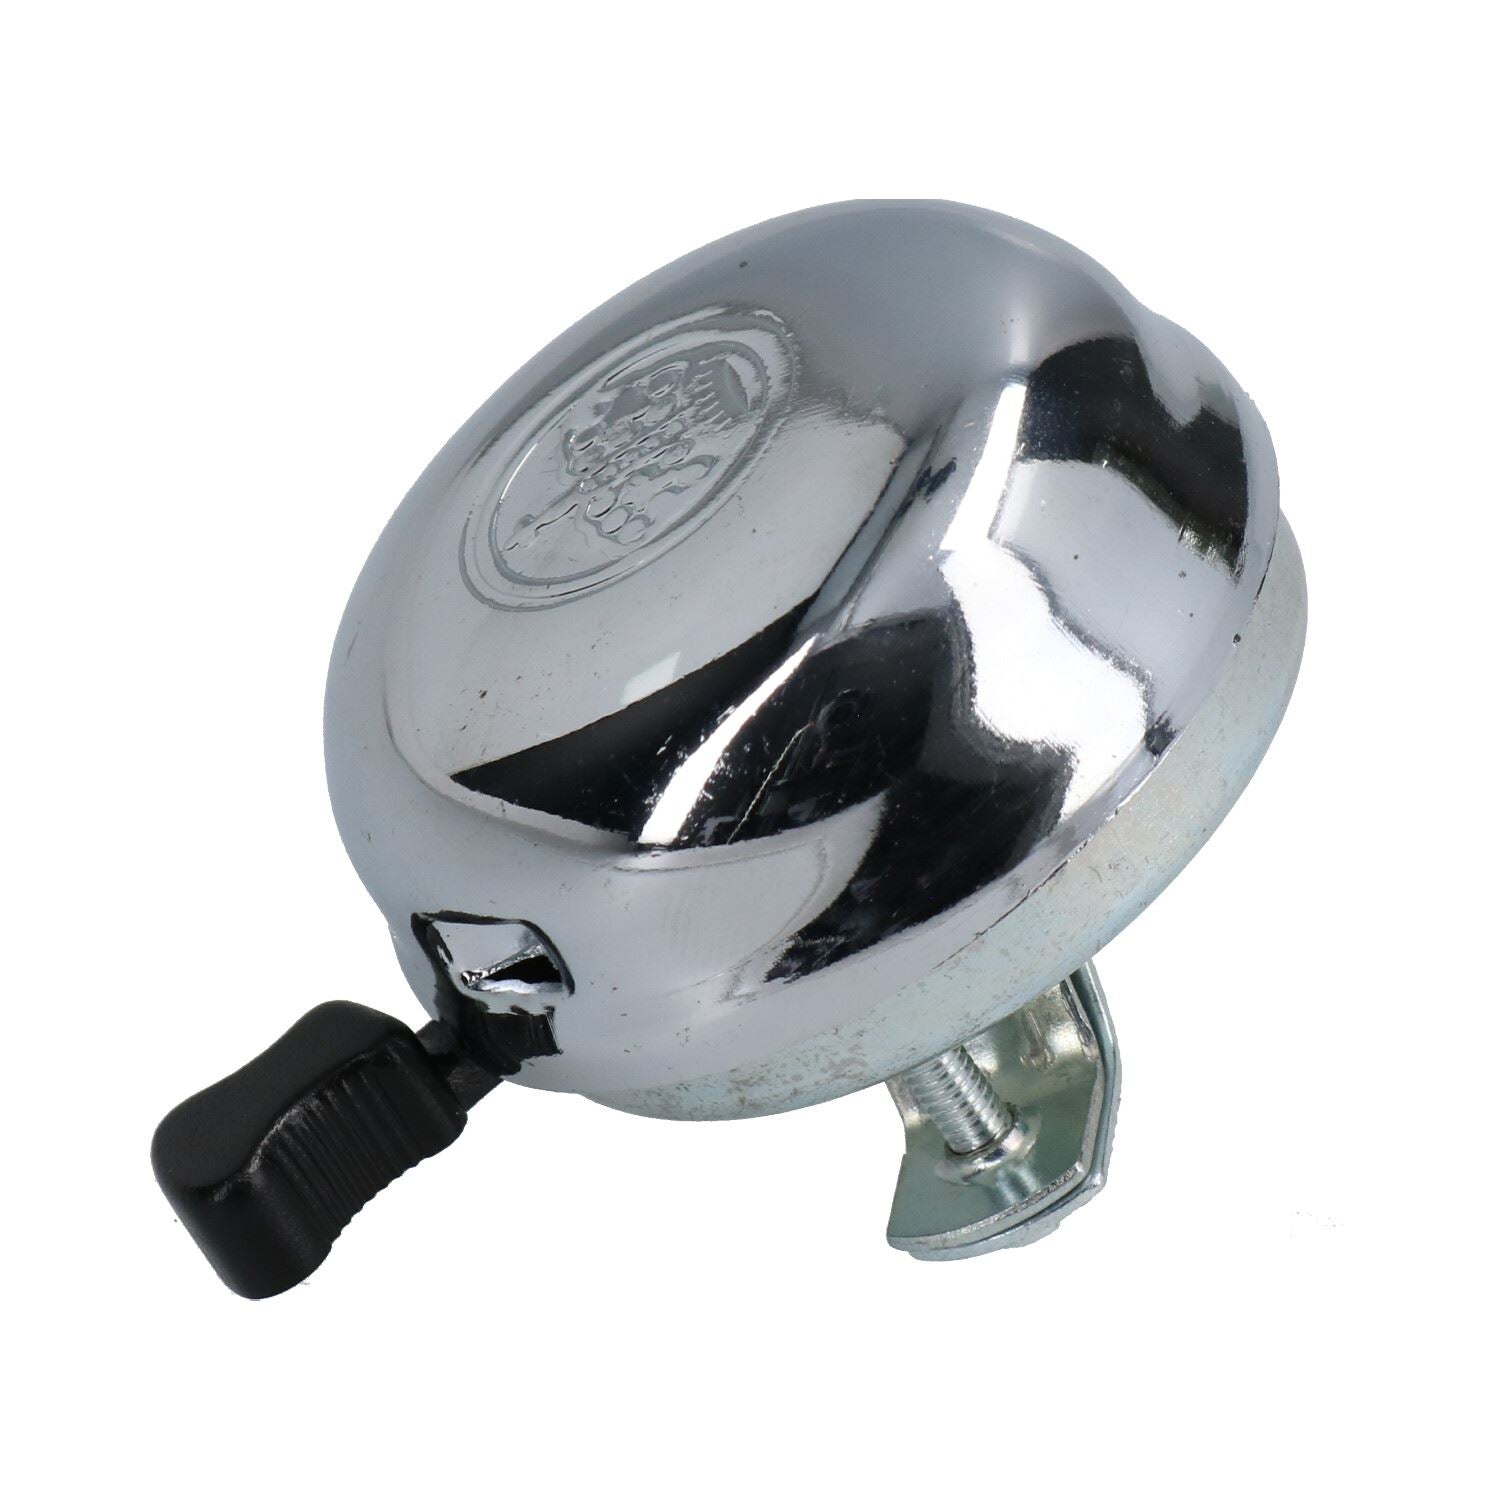 Traditional Crown Dinger Bell Bike Cycle Polished Chrome Finish Handlebar Clamp